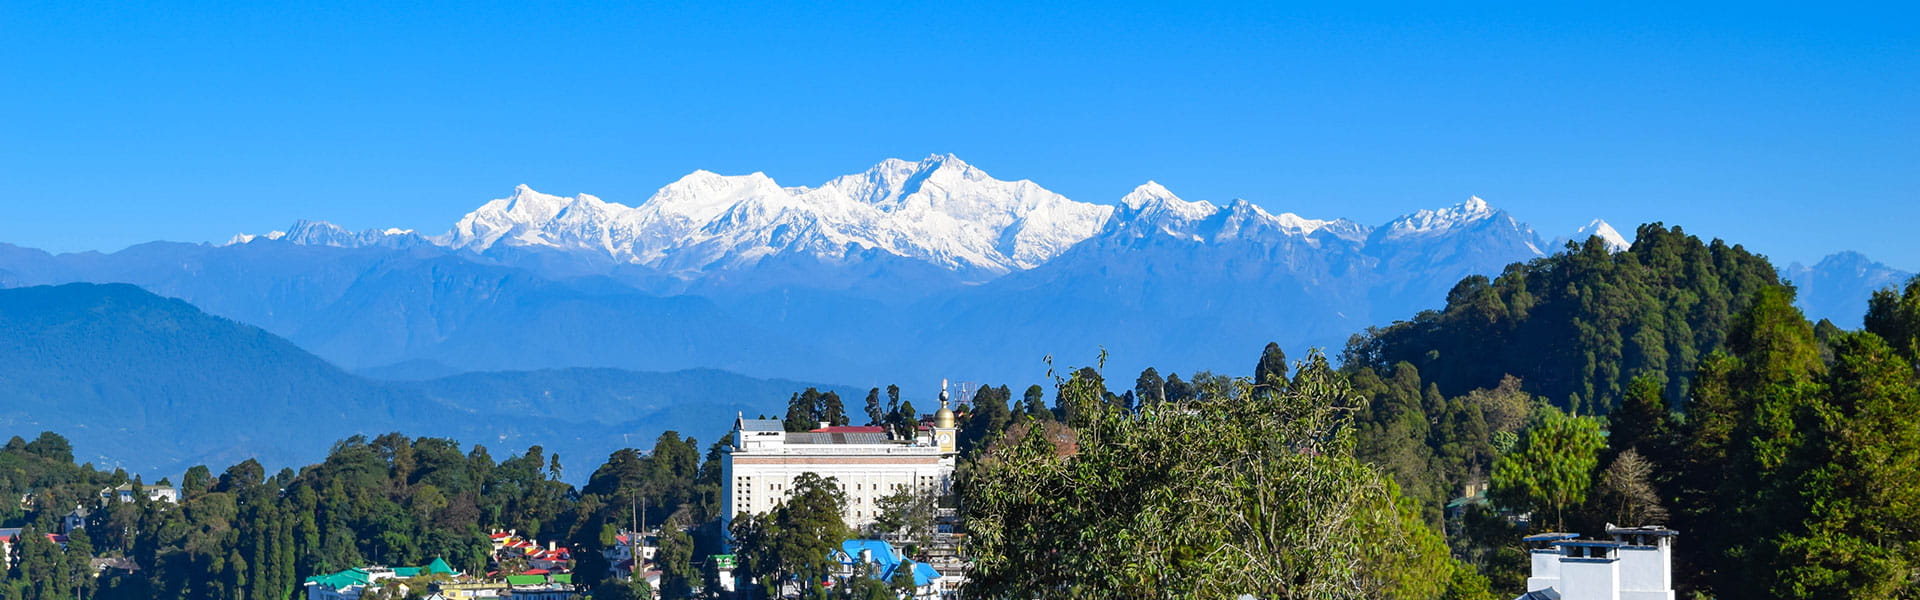 Darjeeling-Sikkim Tour Packages from Siliguri